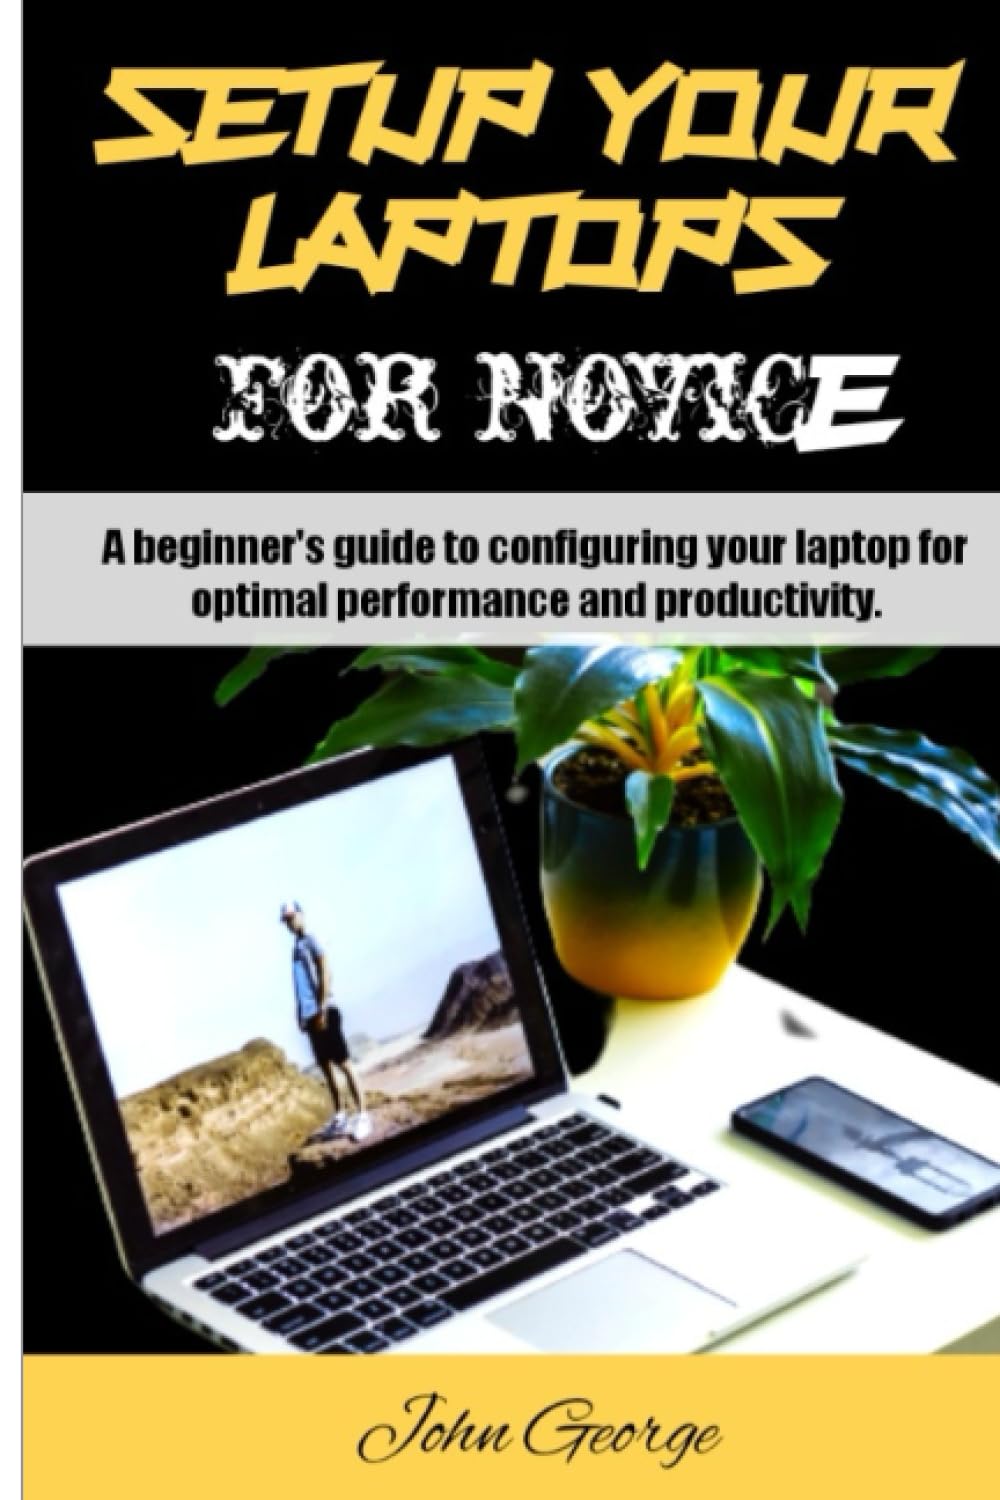 Setup your laptops for novice: A beginner's guide to configuring your laptop for optimal performance and productivity. By John George